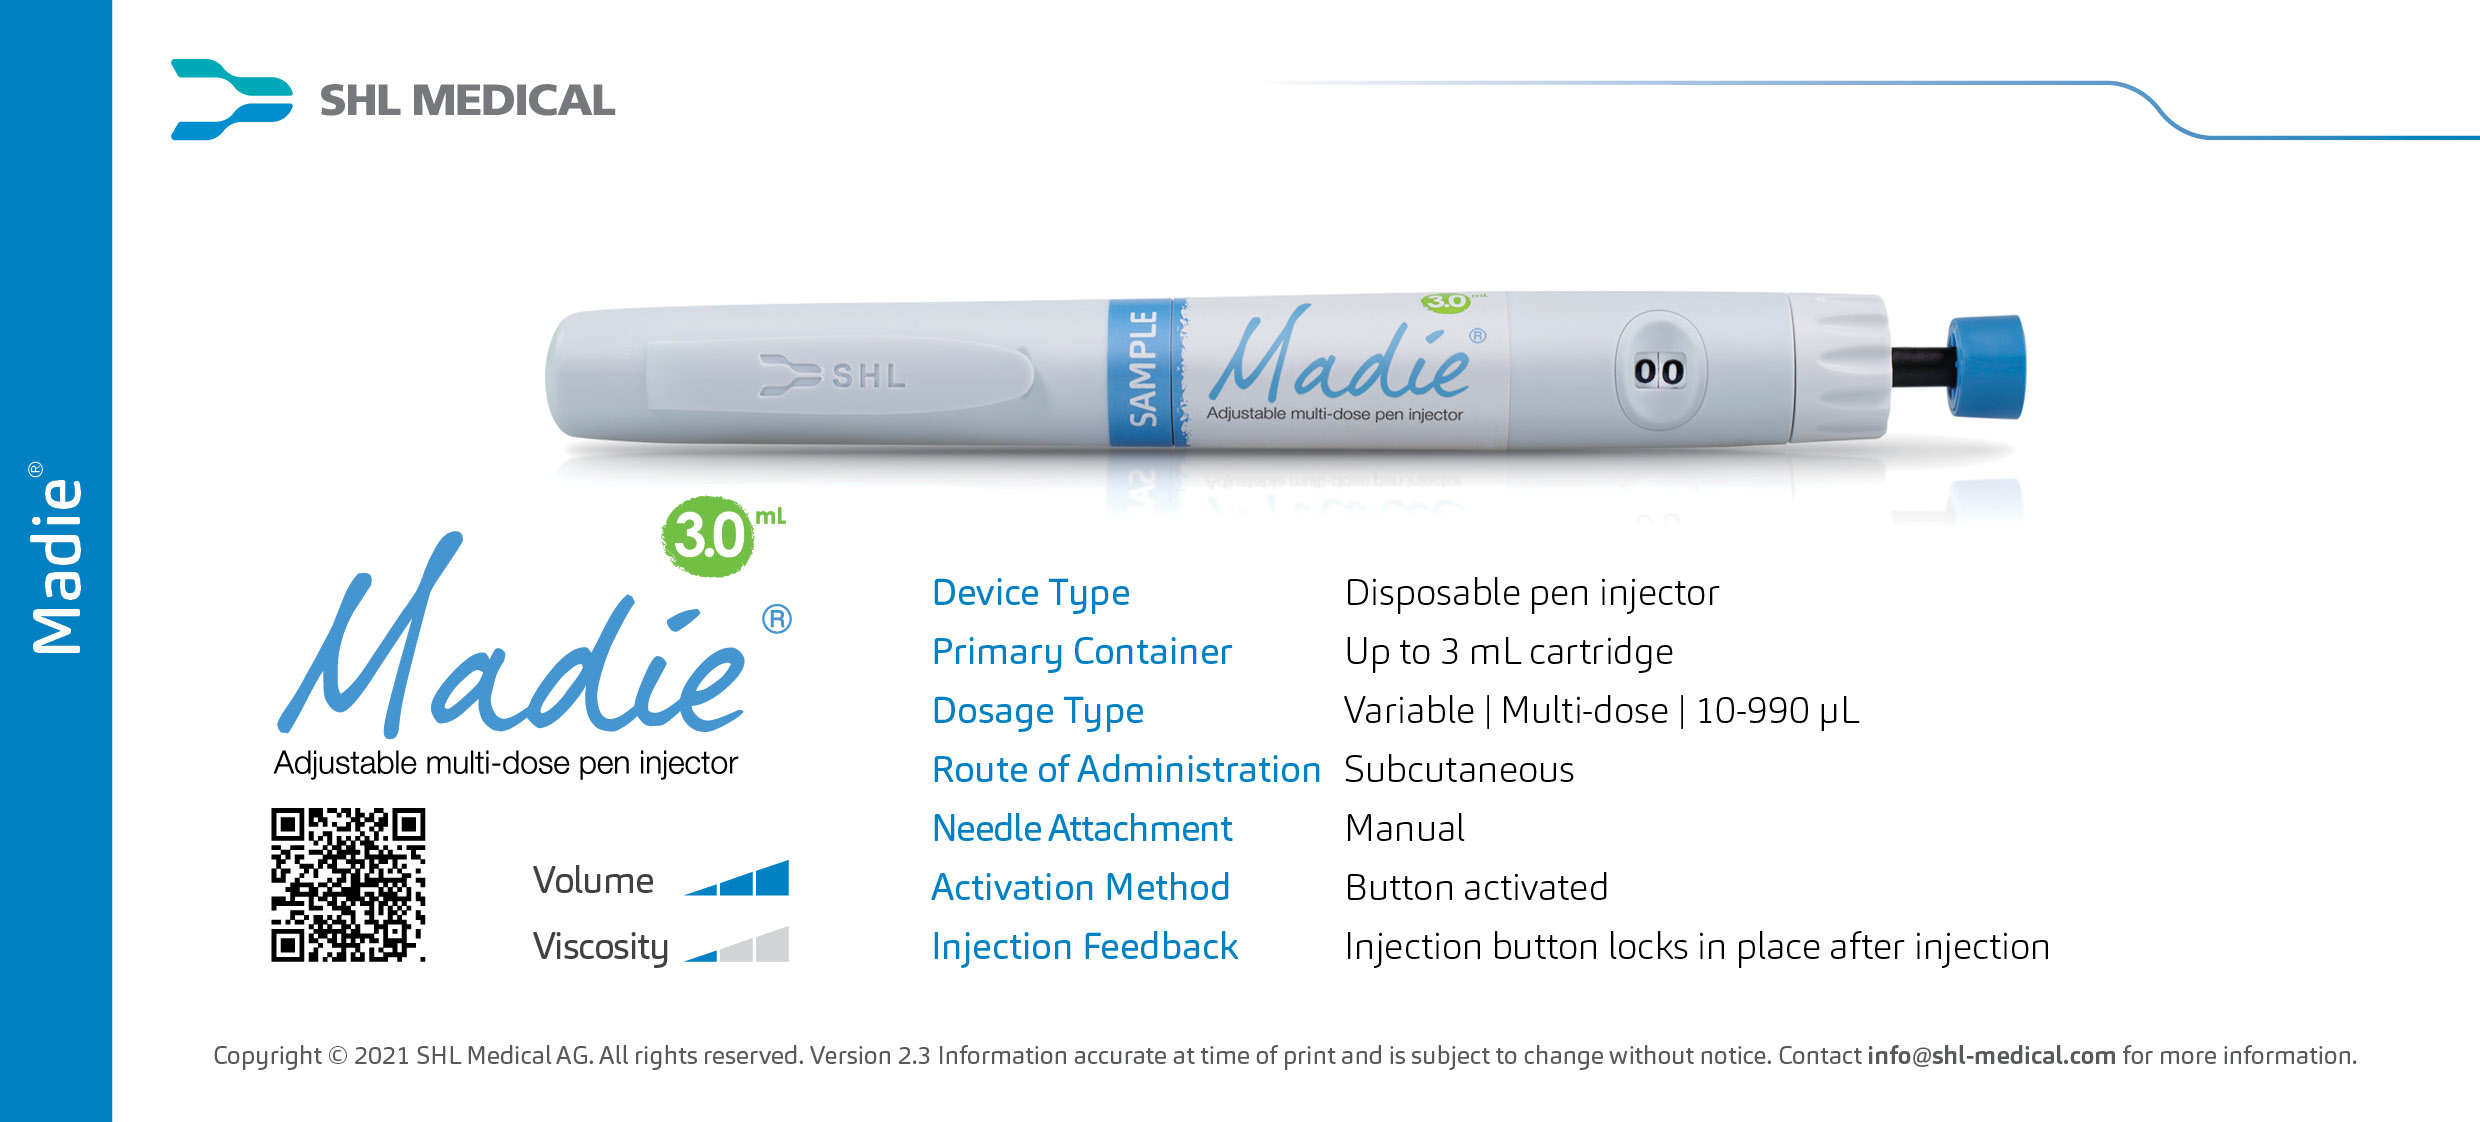 Product card of Madie® button activated pen injector with up to 3 mL cartridge developed by SHL Medical featuring its device specifications and handling instructions